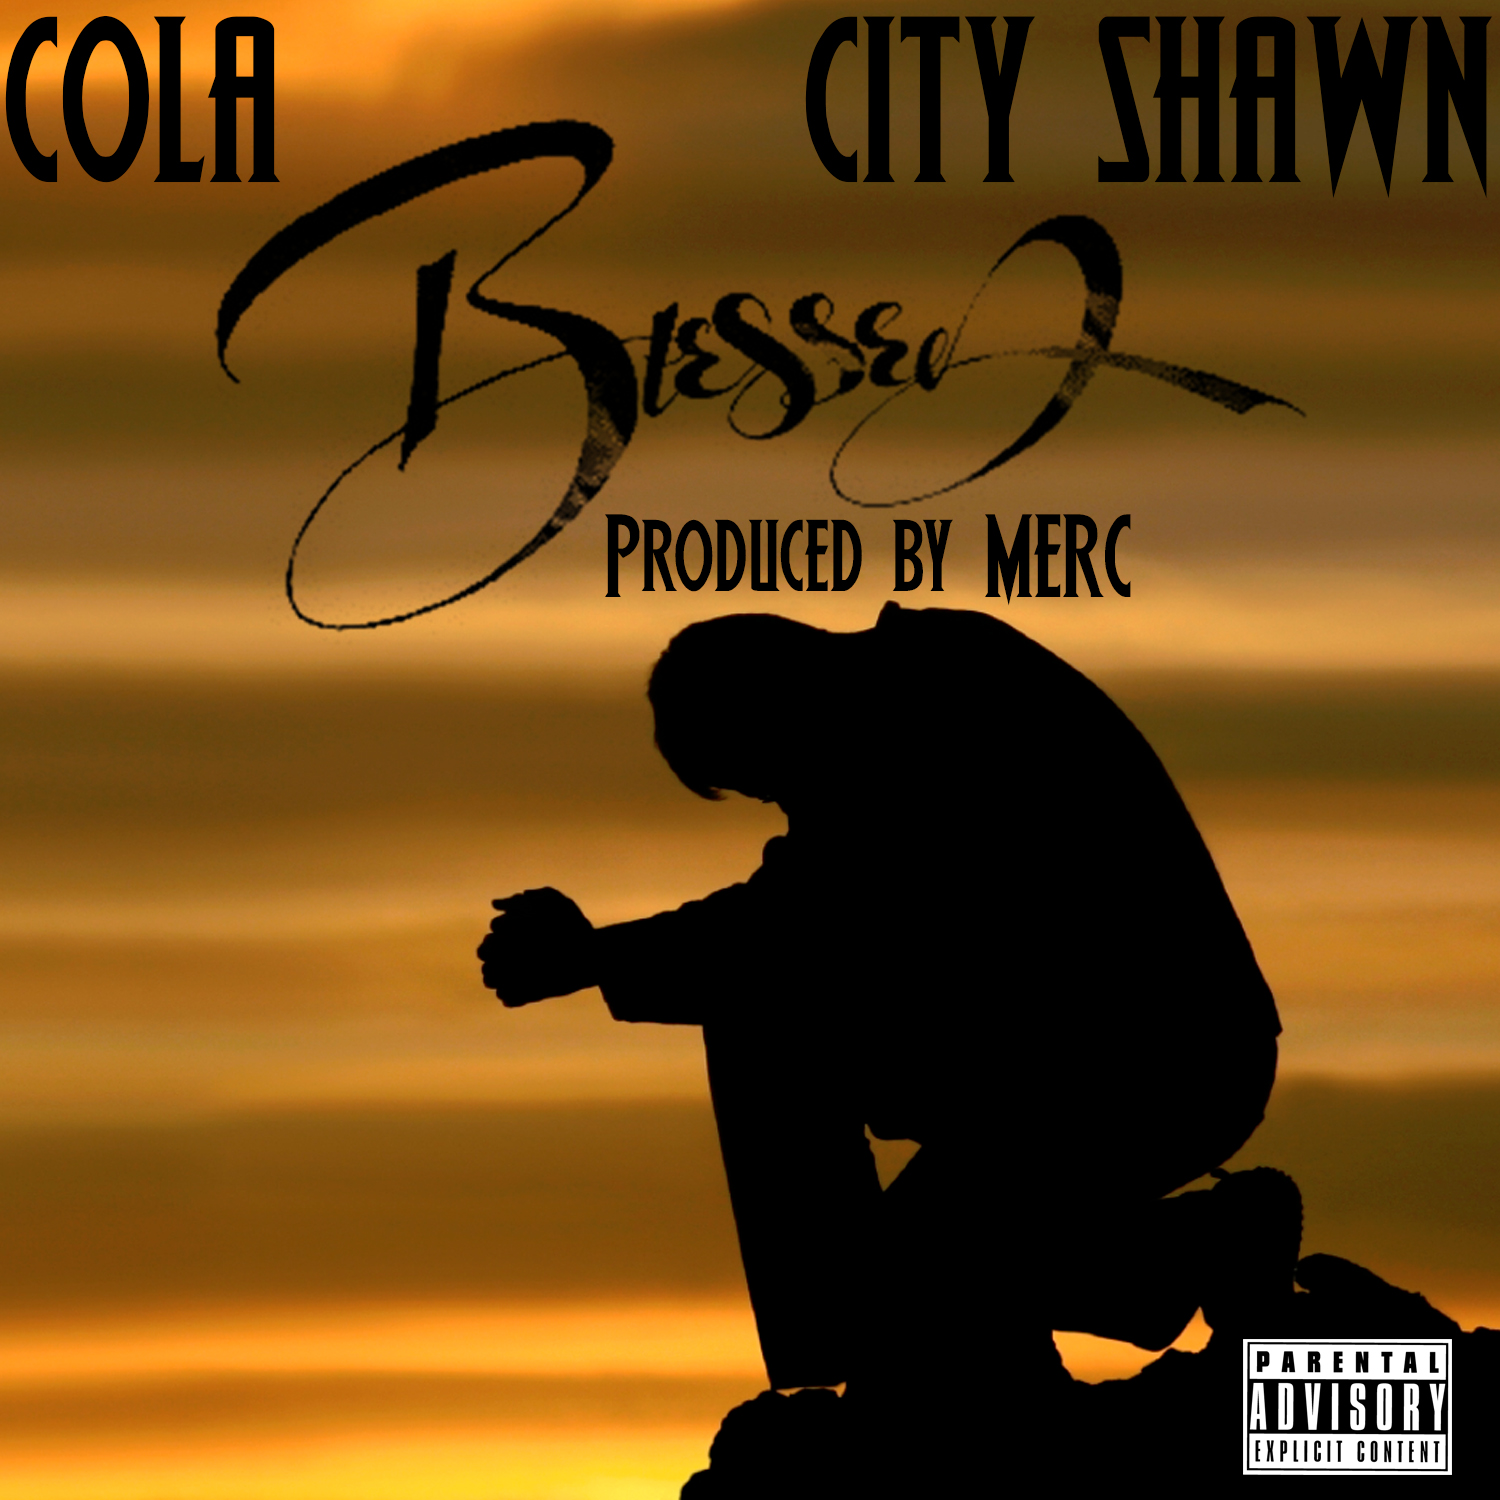 Cola ft. City Shawn - Blessed [Prod. By Merc.] [Thizzler.com Exclusive]